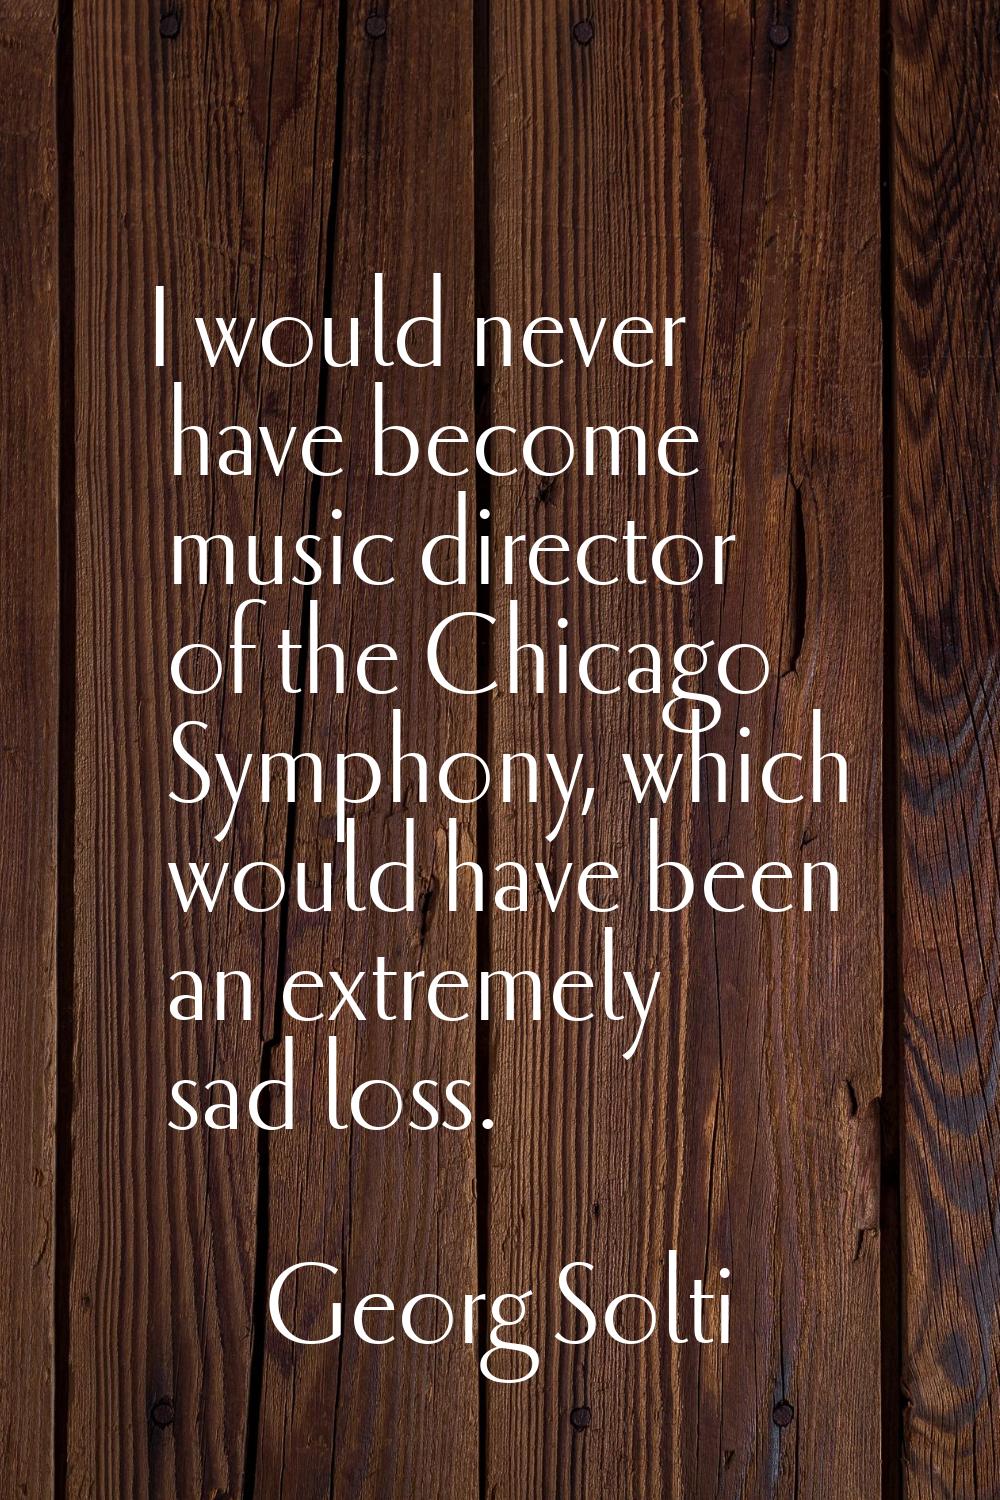 I would never have become music director of the Chicago Symphony, which would have been an extremel